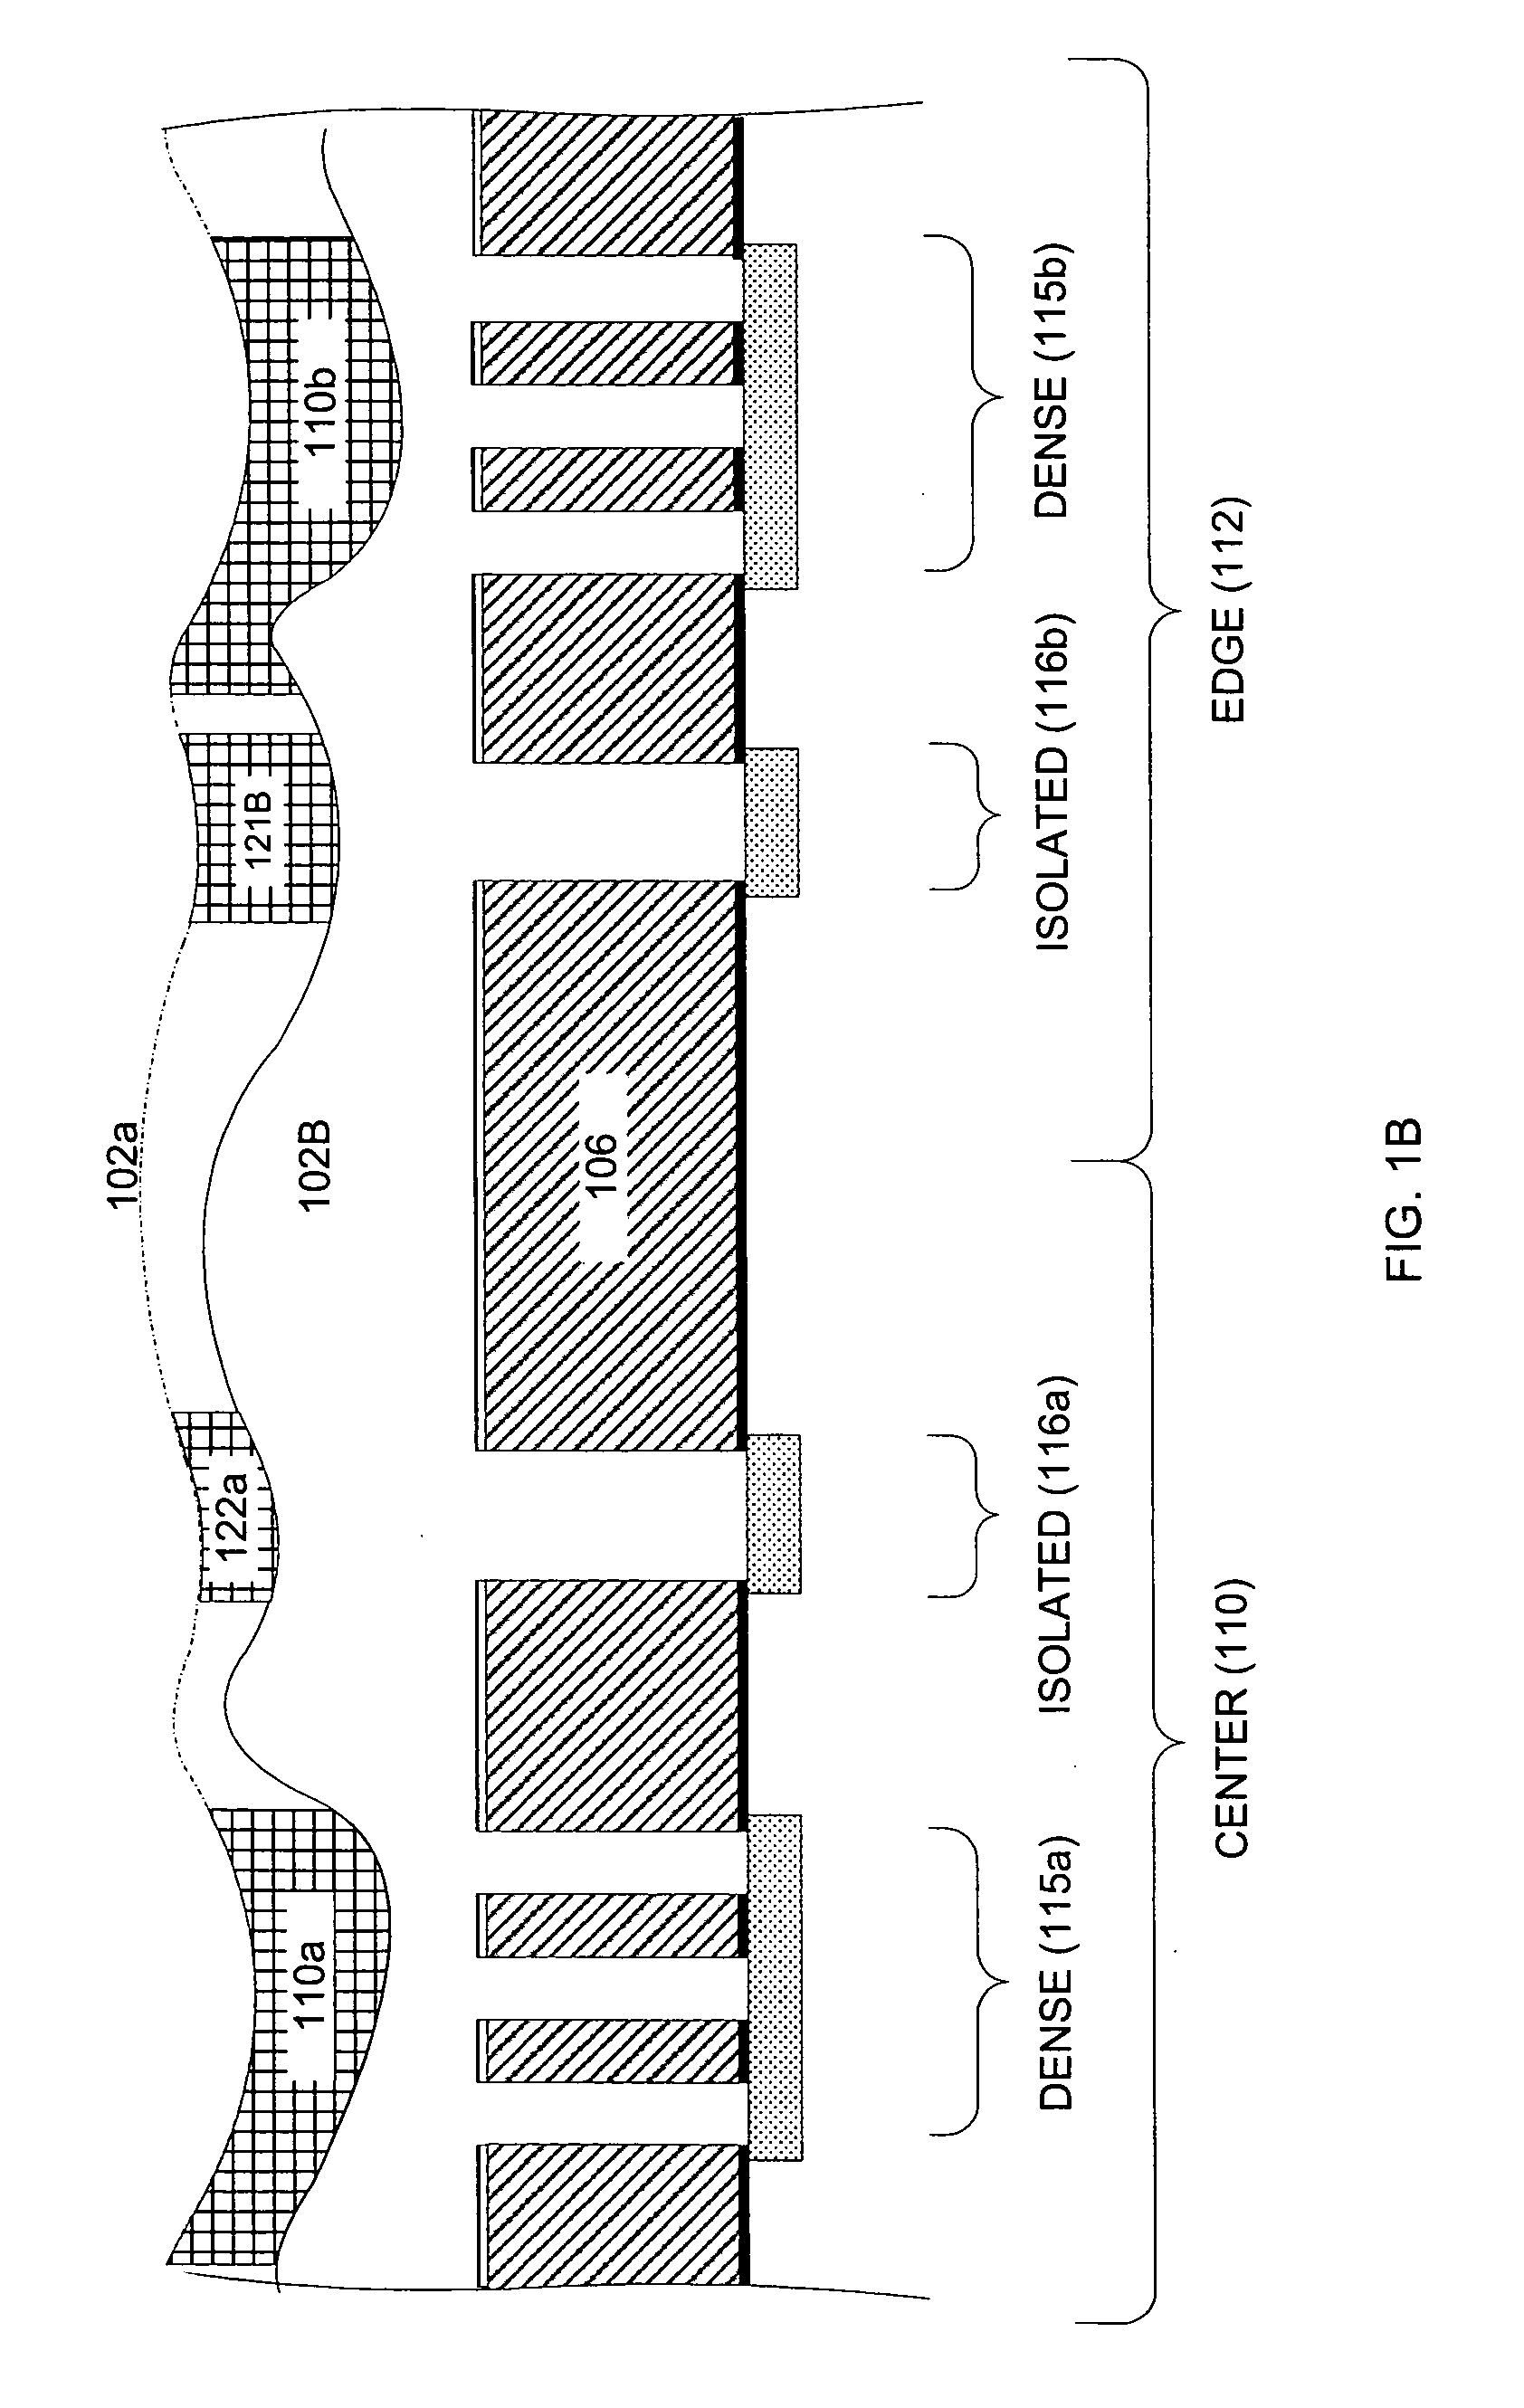 Methods and apparatus for the optimization of photo resist etching in a plasma processing system